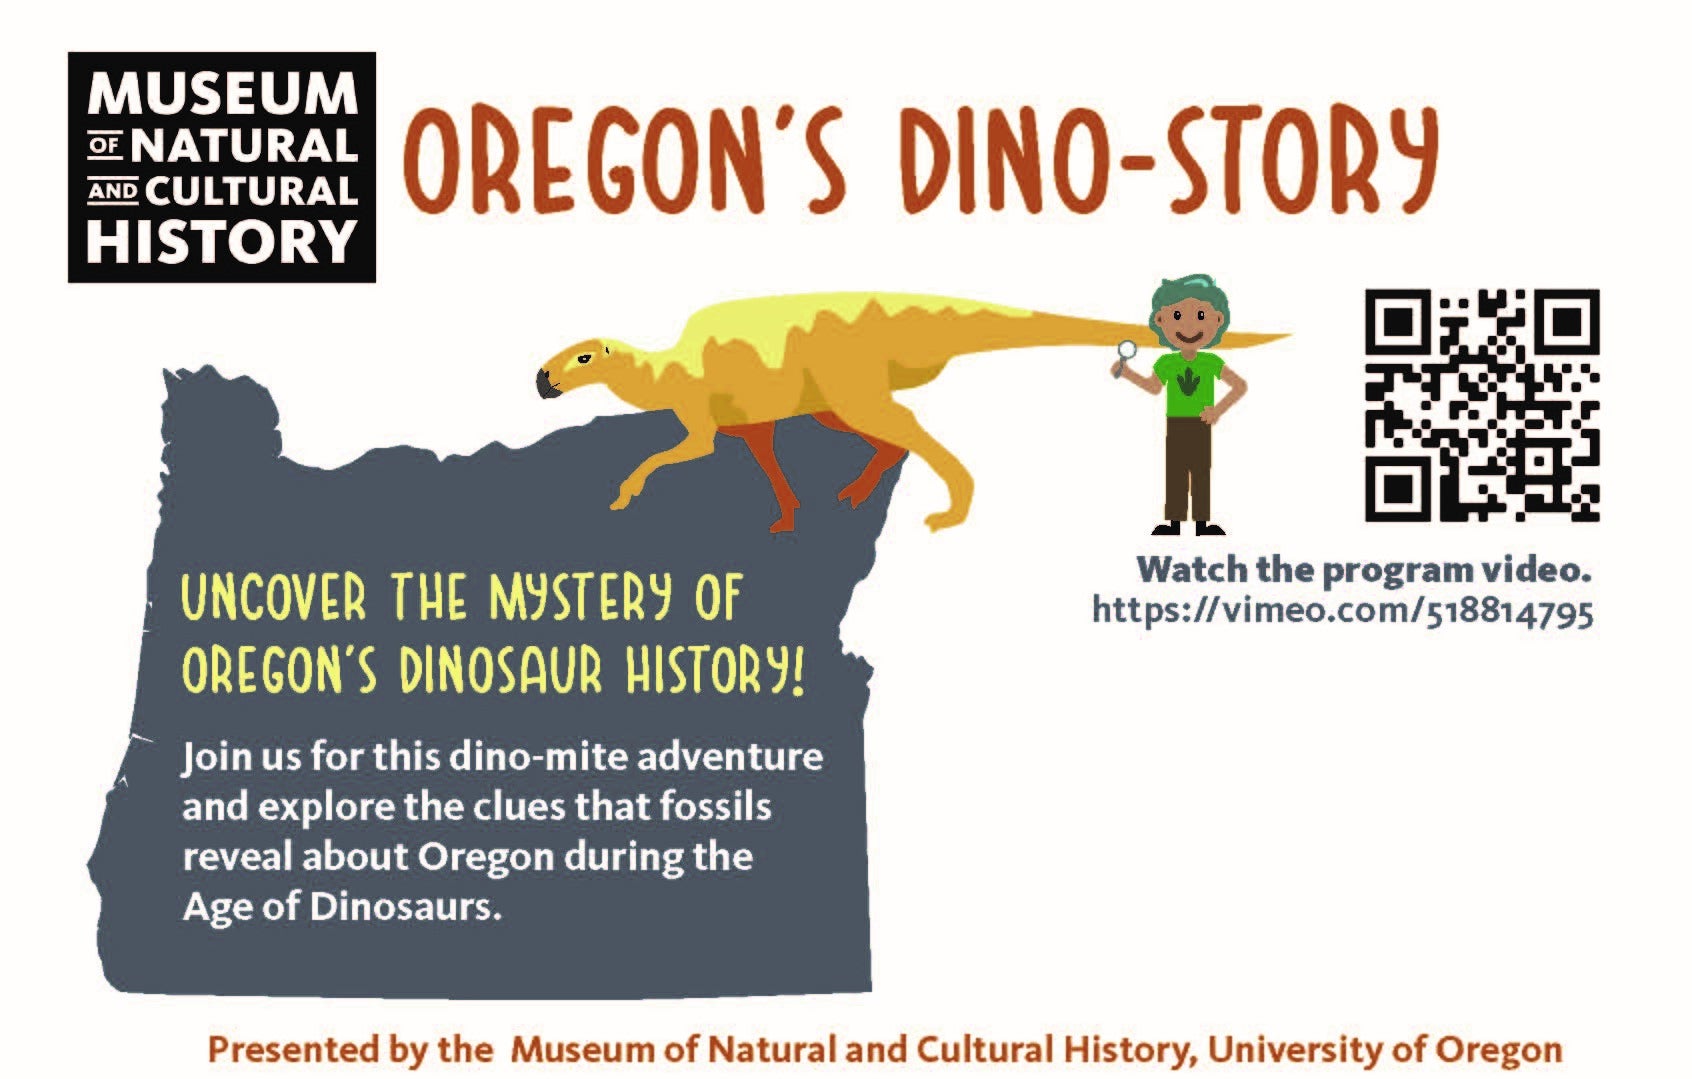 Shape of Oregon with a dinosaur and person over the top with the title Oregon's Dino-Story